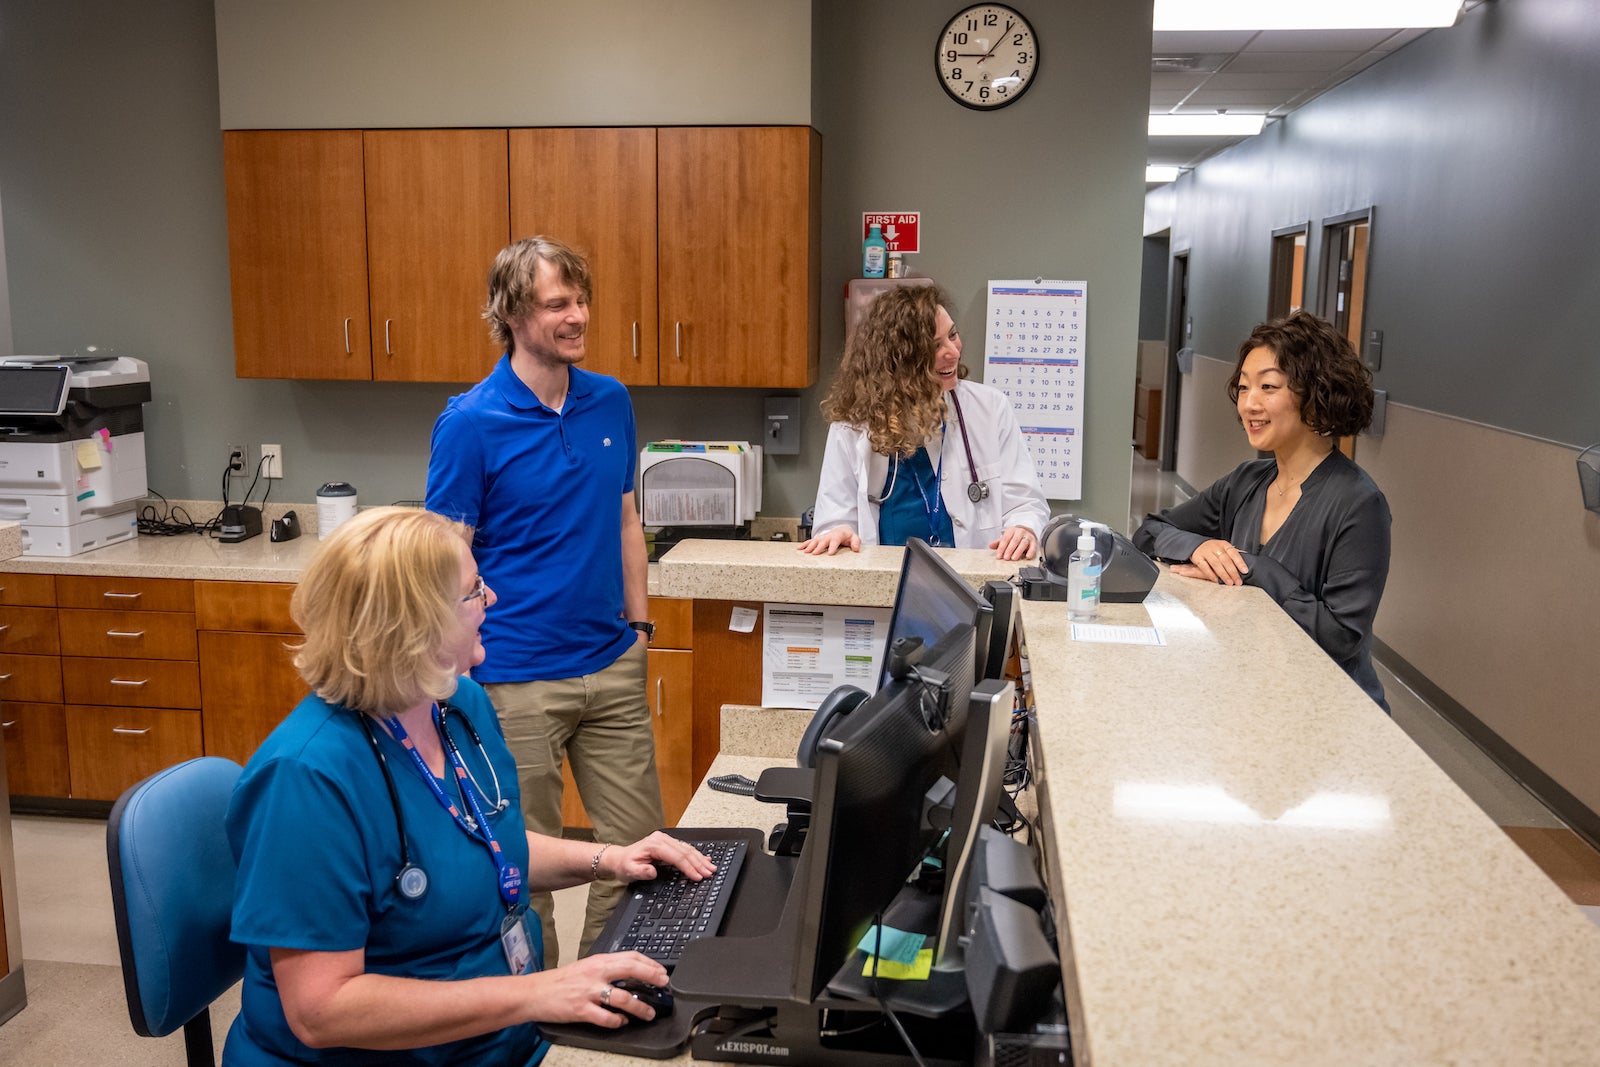 Health Services staff consult across disciplines. Left to right: Tracy Tew, licensed practical nurse; Brian Davies, counselor and group counseling coordinator; Heather Wilcke, nurse practitioner; and Ayako Otani, counselor and clinical coordinator.